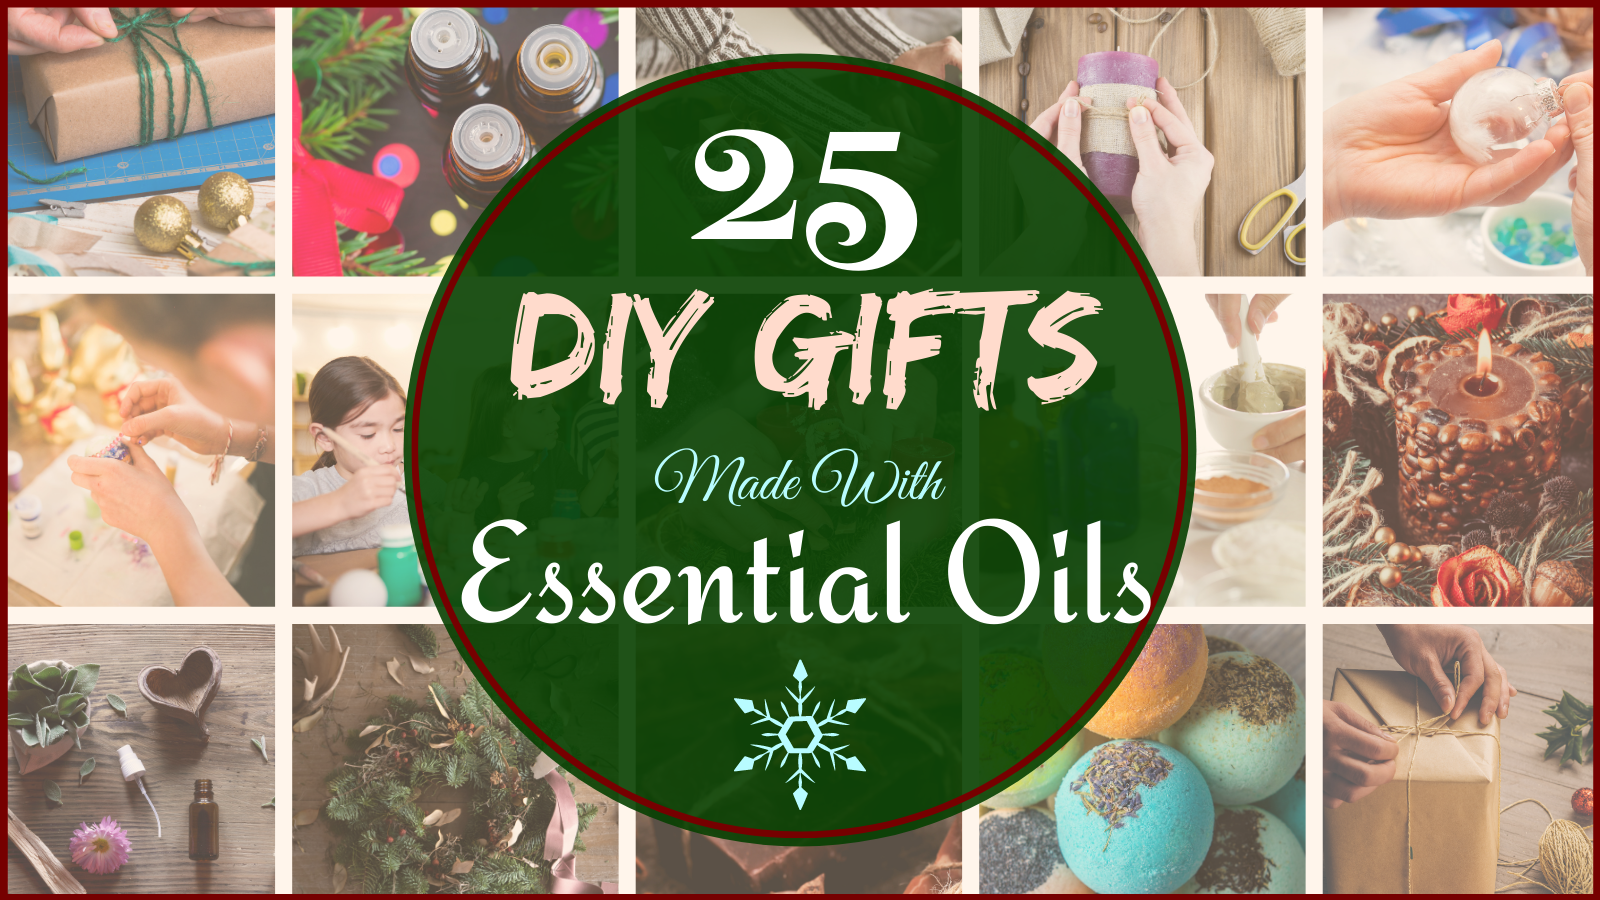 25 DIY gifts made with essential oils